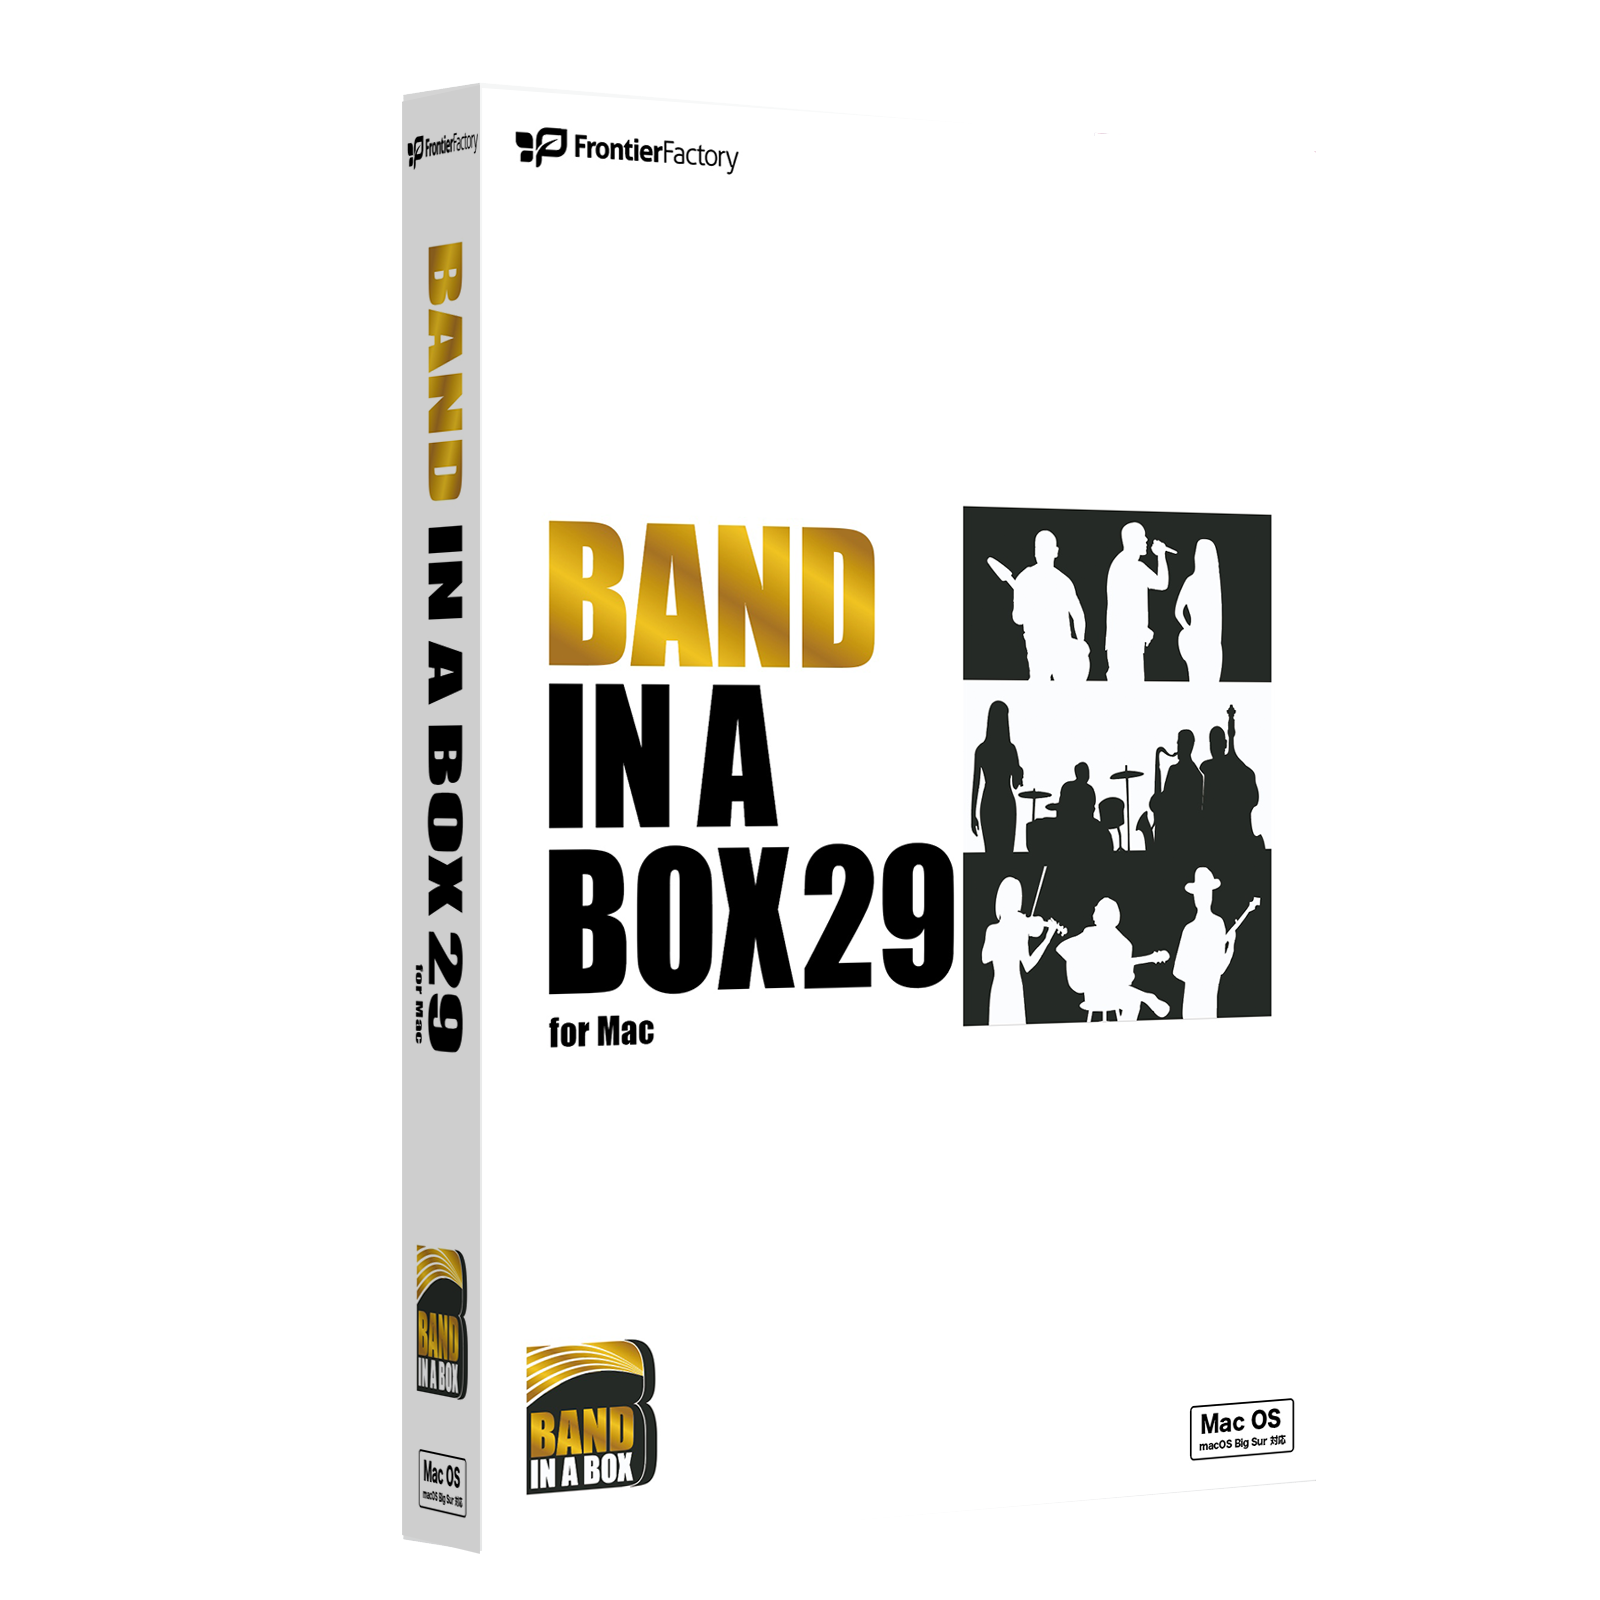 Band-in-a-Box 29 for Mac